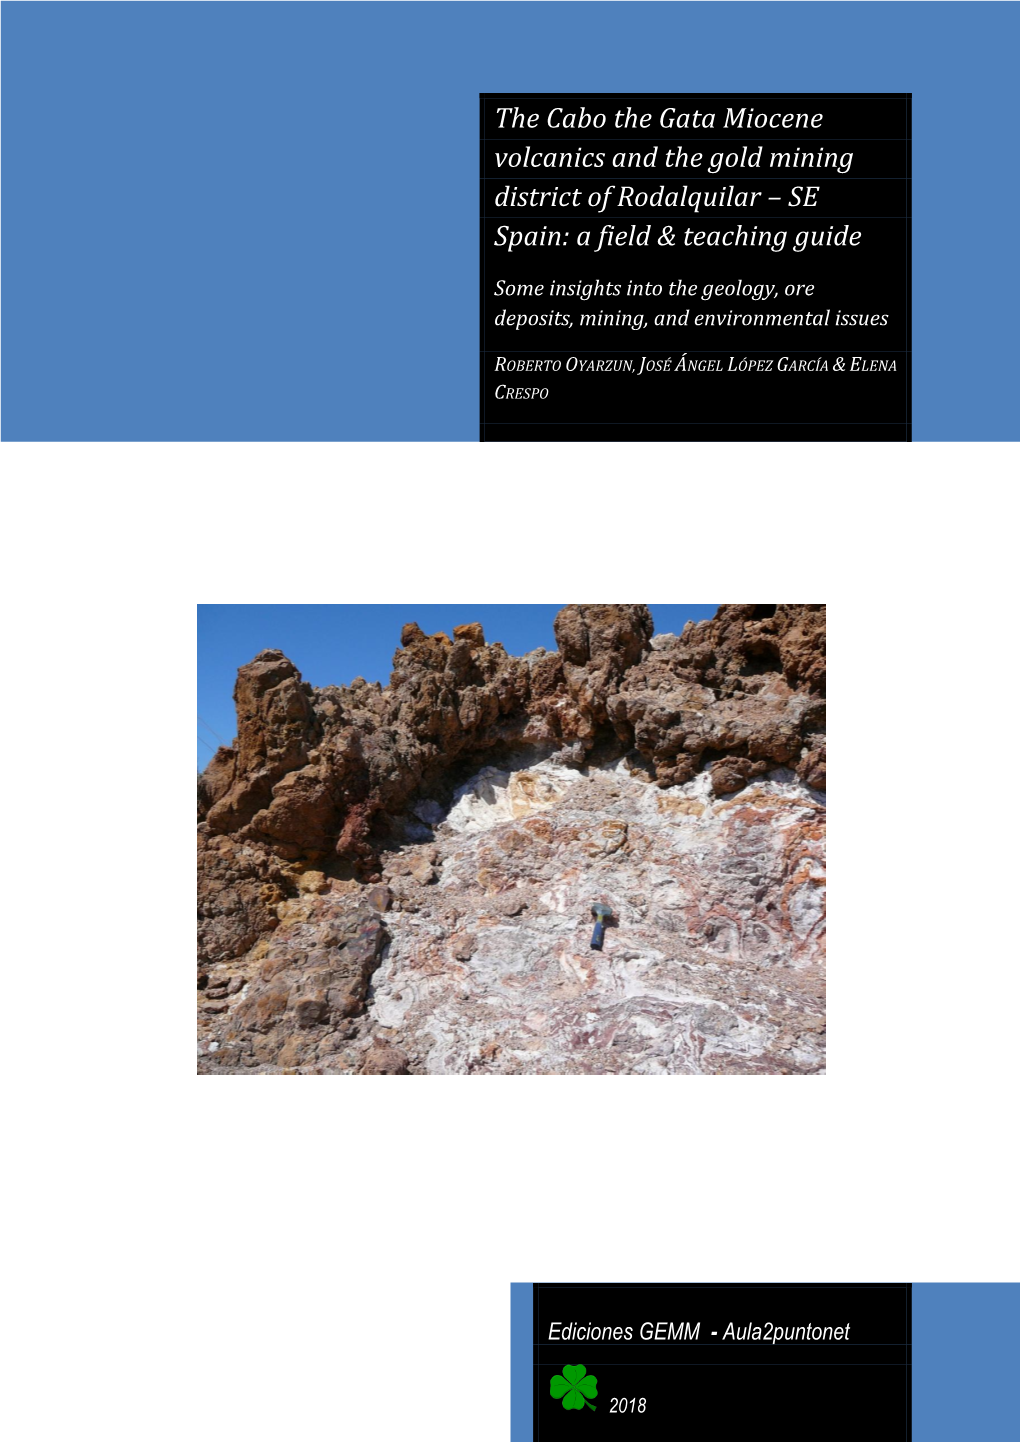 The Cabo the Gata Miocene Volcanics and the Gold Mining District of Rodalquilar – SE Spain: a Field & Teaching Guide